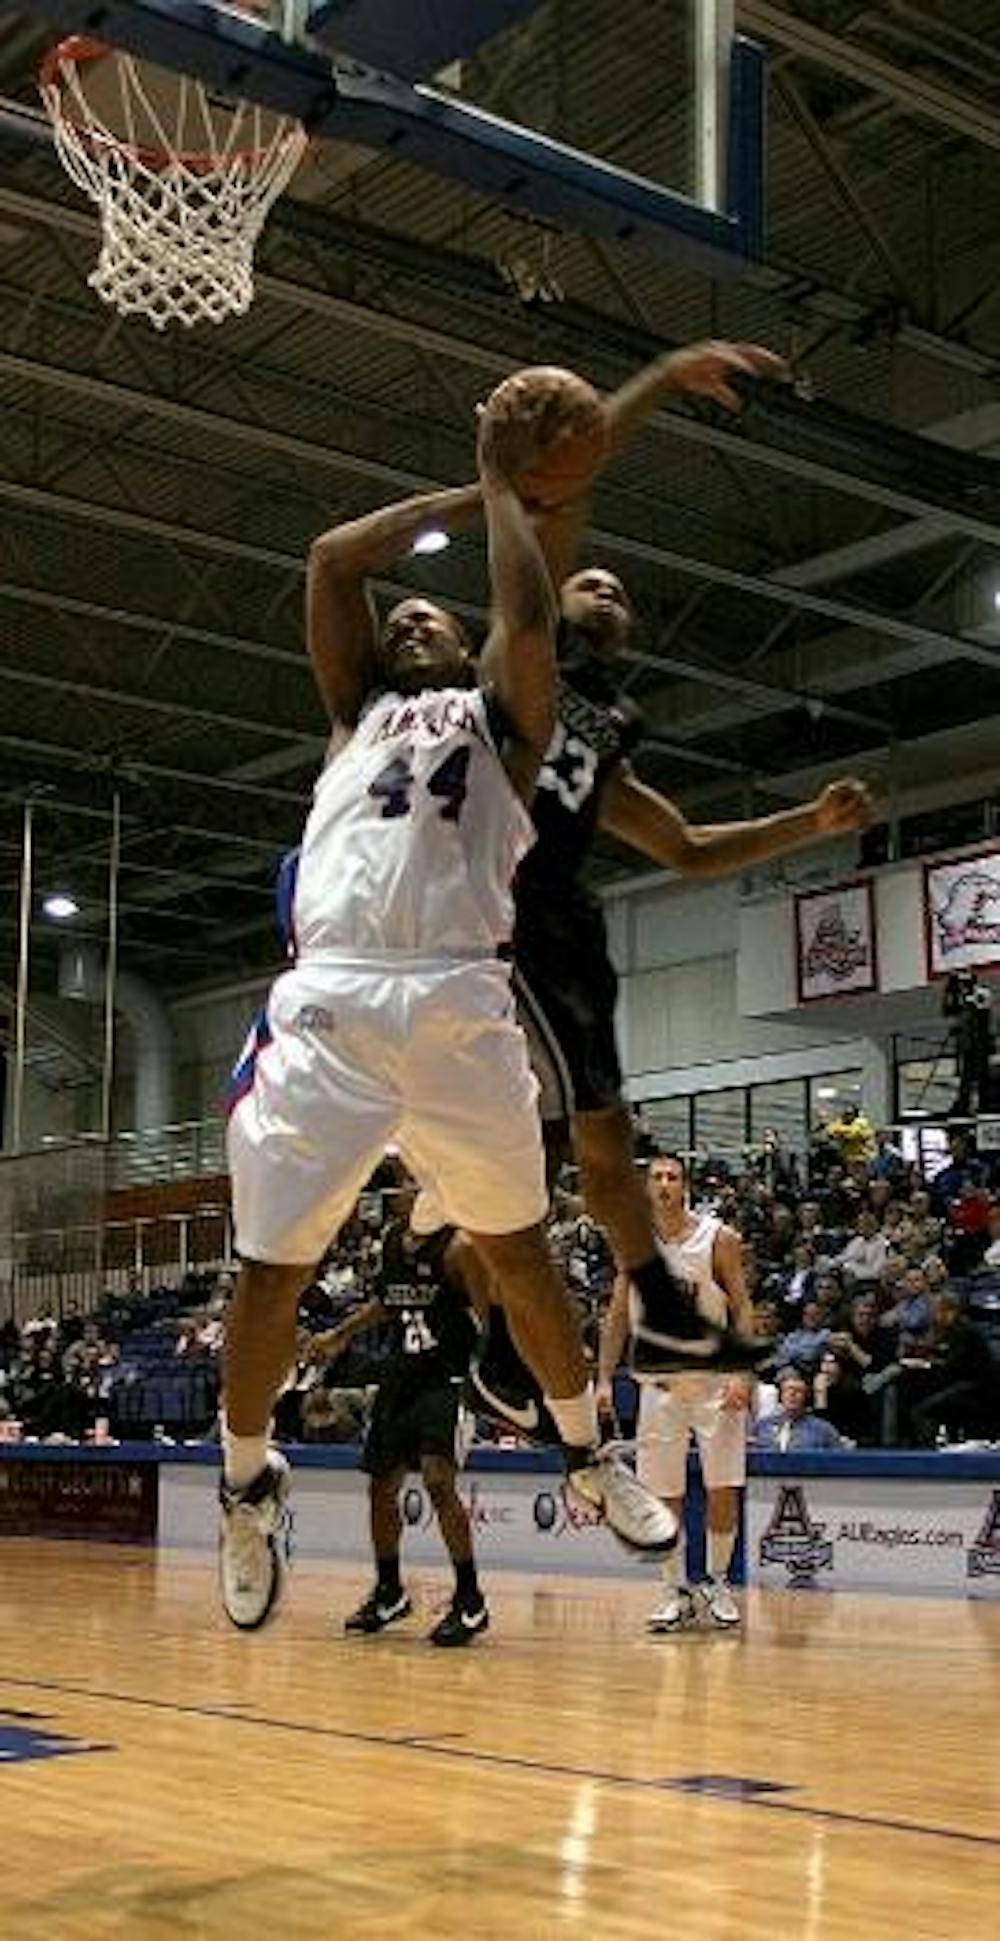 IN FLIGHT - Junior forward Jordan Nichols avoids the block with all of his might as he attempts to make a shot in last night's game in Bender. AU won their sixth straight game, putting them in first in the PL.